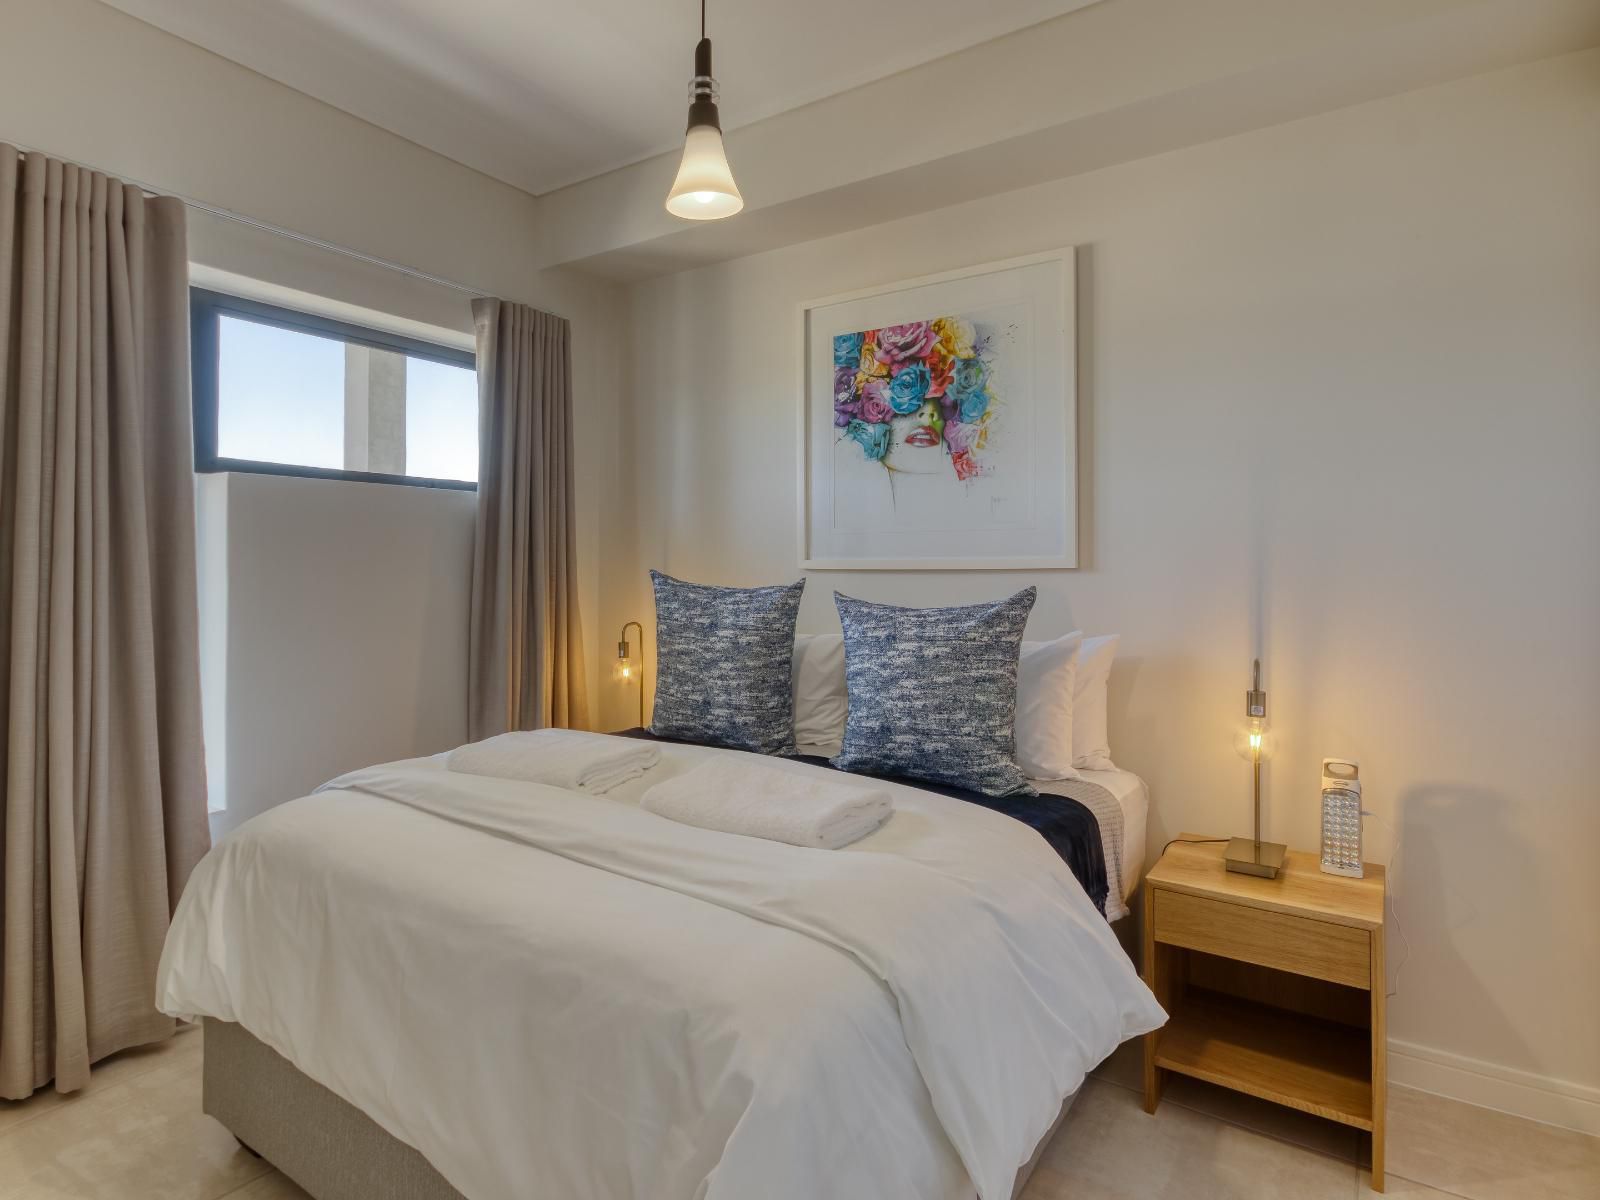 Uniquestay Paardevlei Square 2 Bedroom Apartment Firgrove Rural Somerset West Western Cape South Africa Bedroom